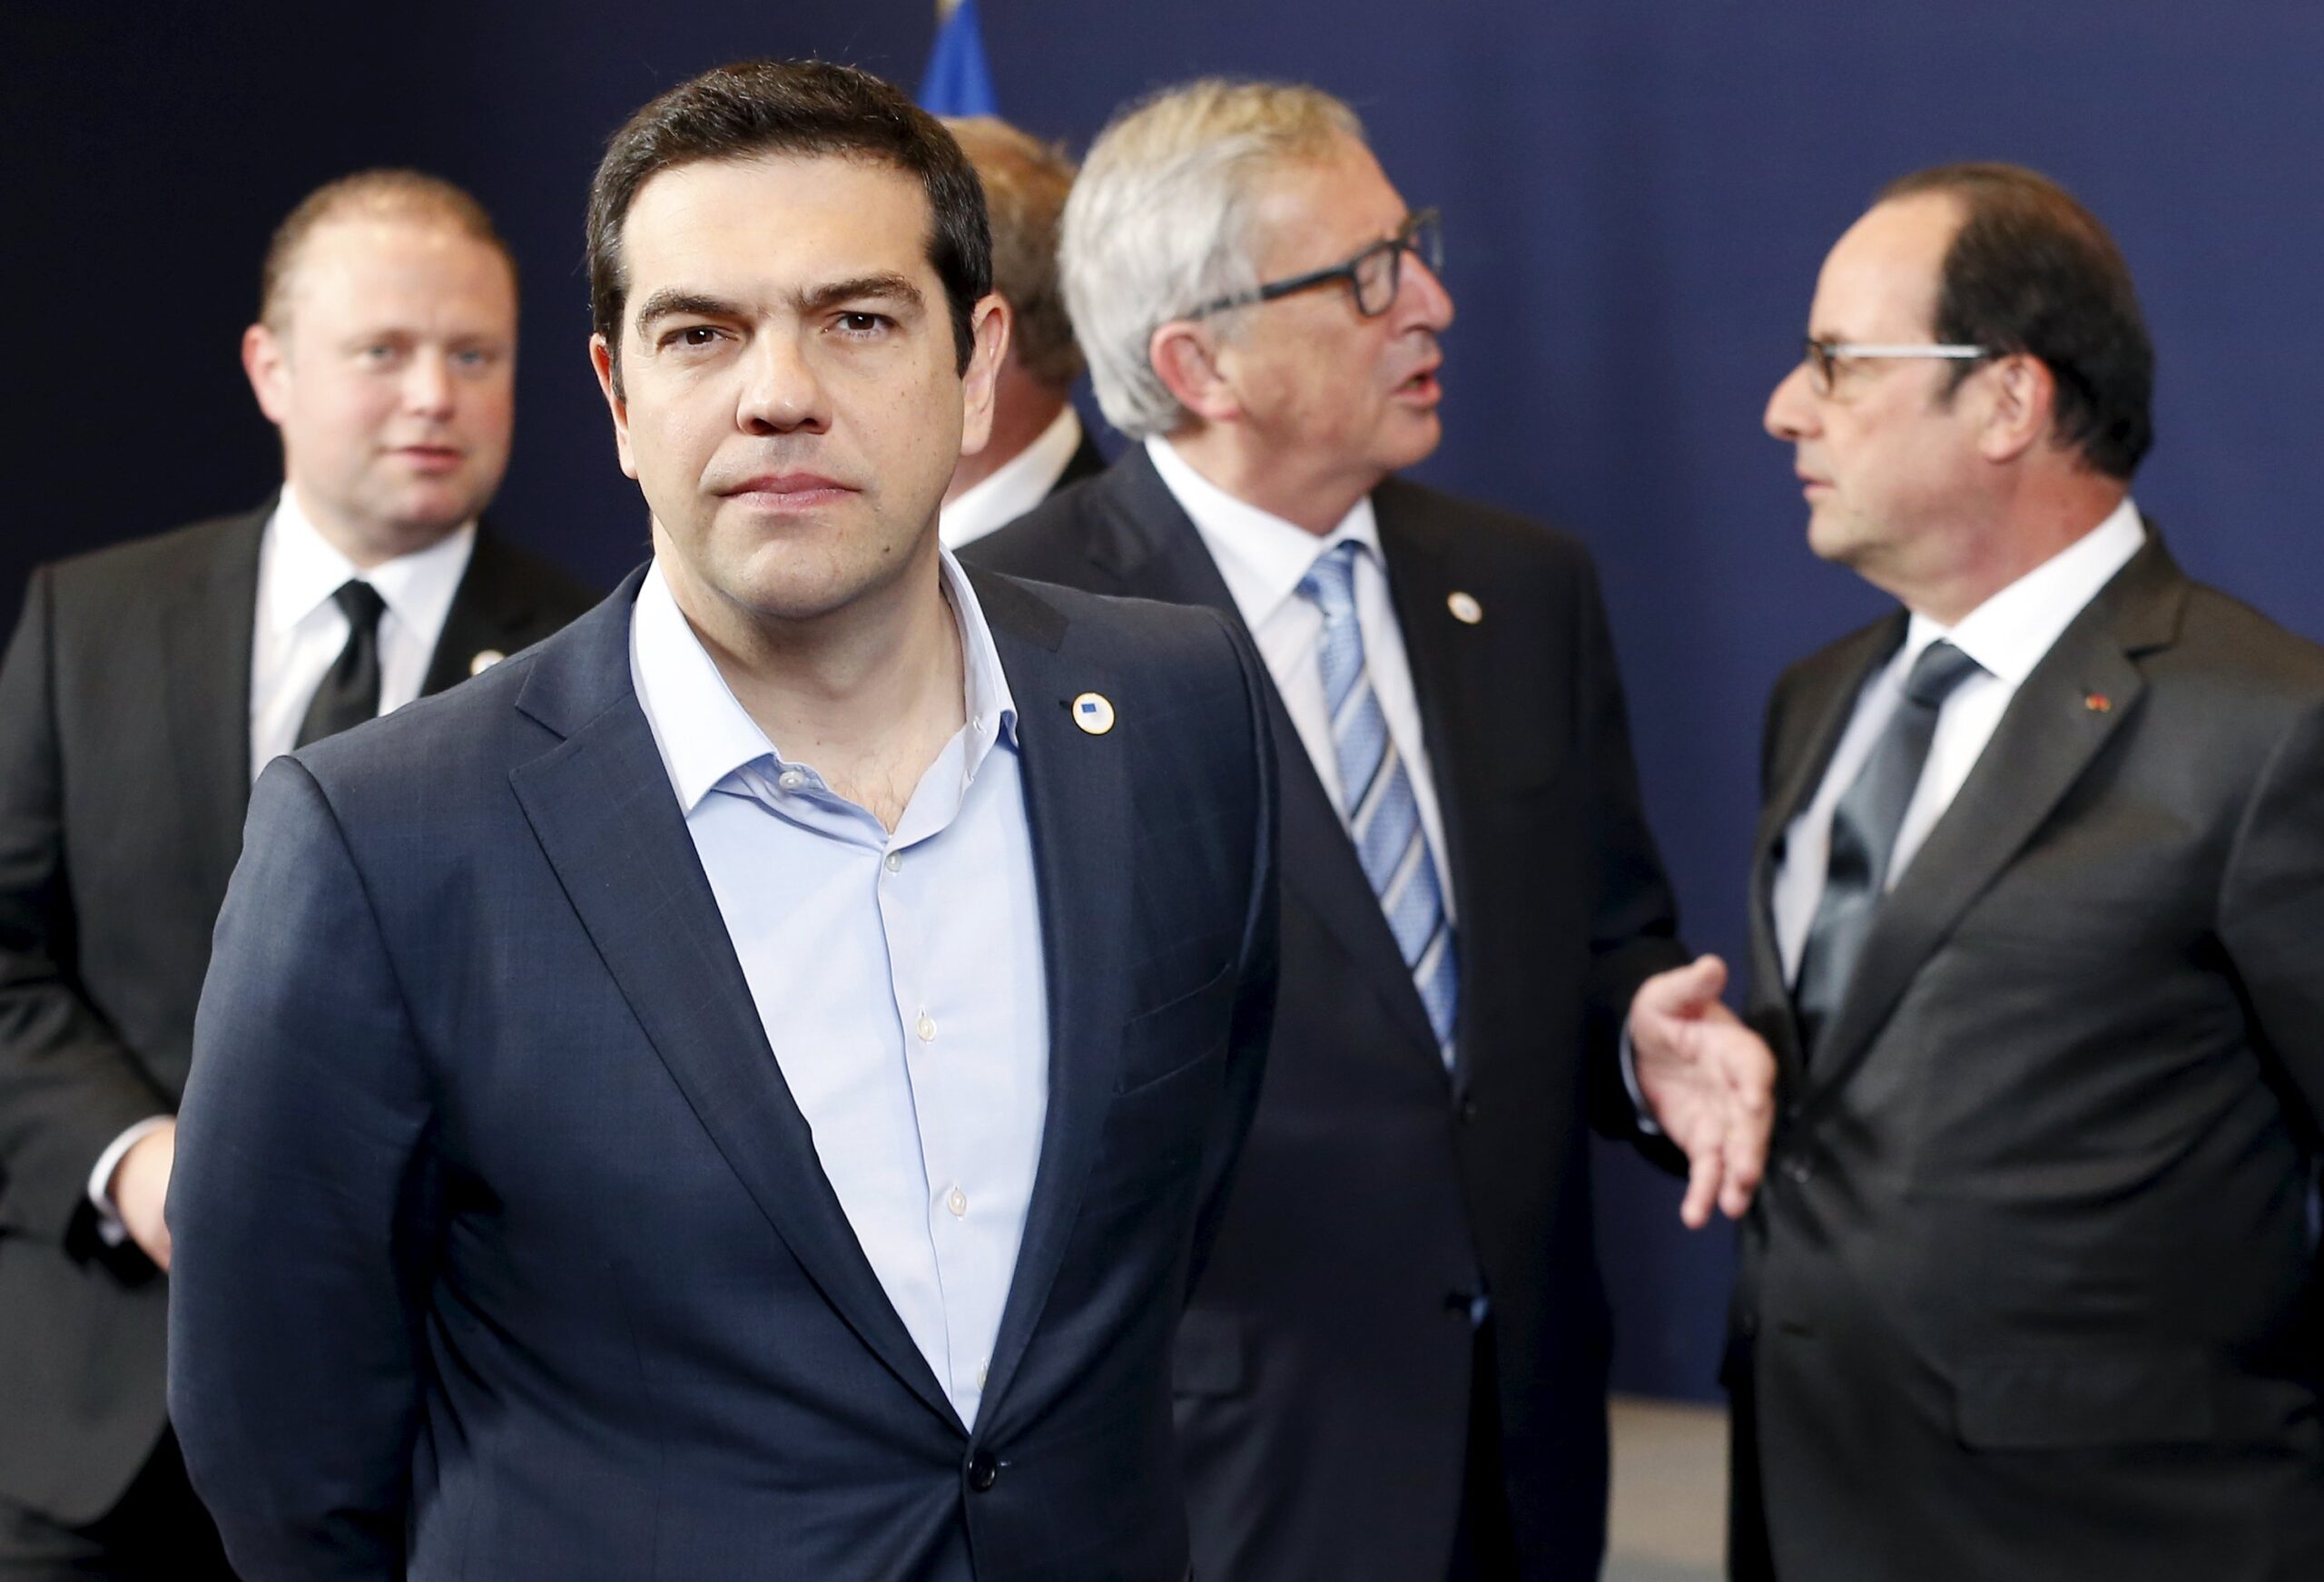 Greece's PM Tsipras, Malta's PM Muscat, EU Commission President Juncker and France's President Hollande attend an EU leaders summit in Brussels